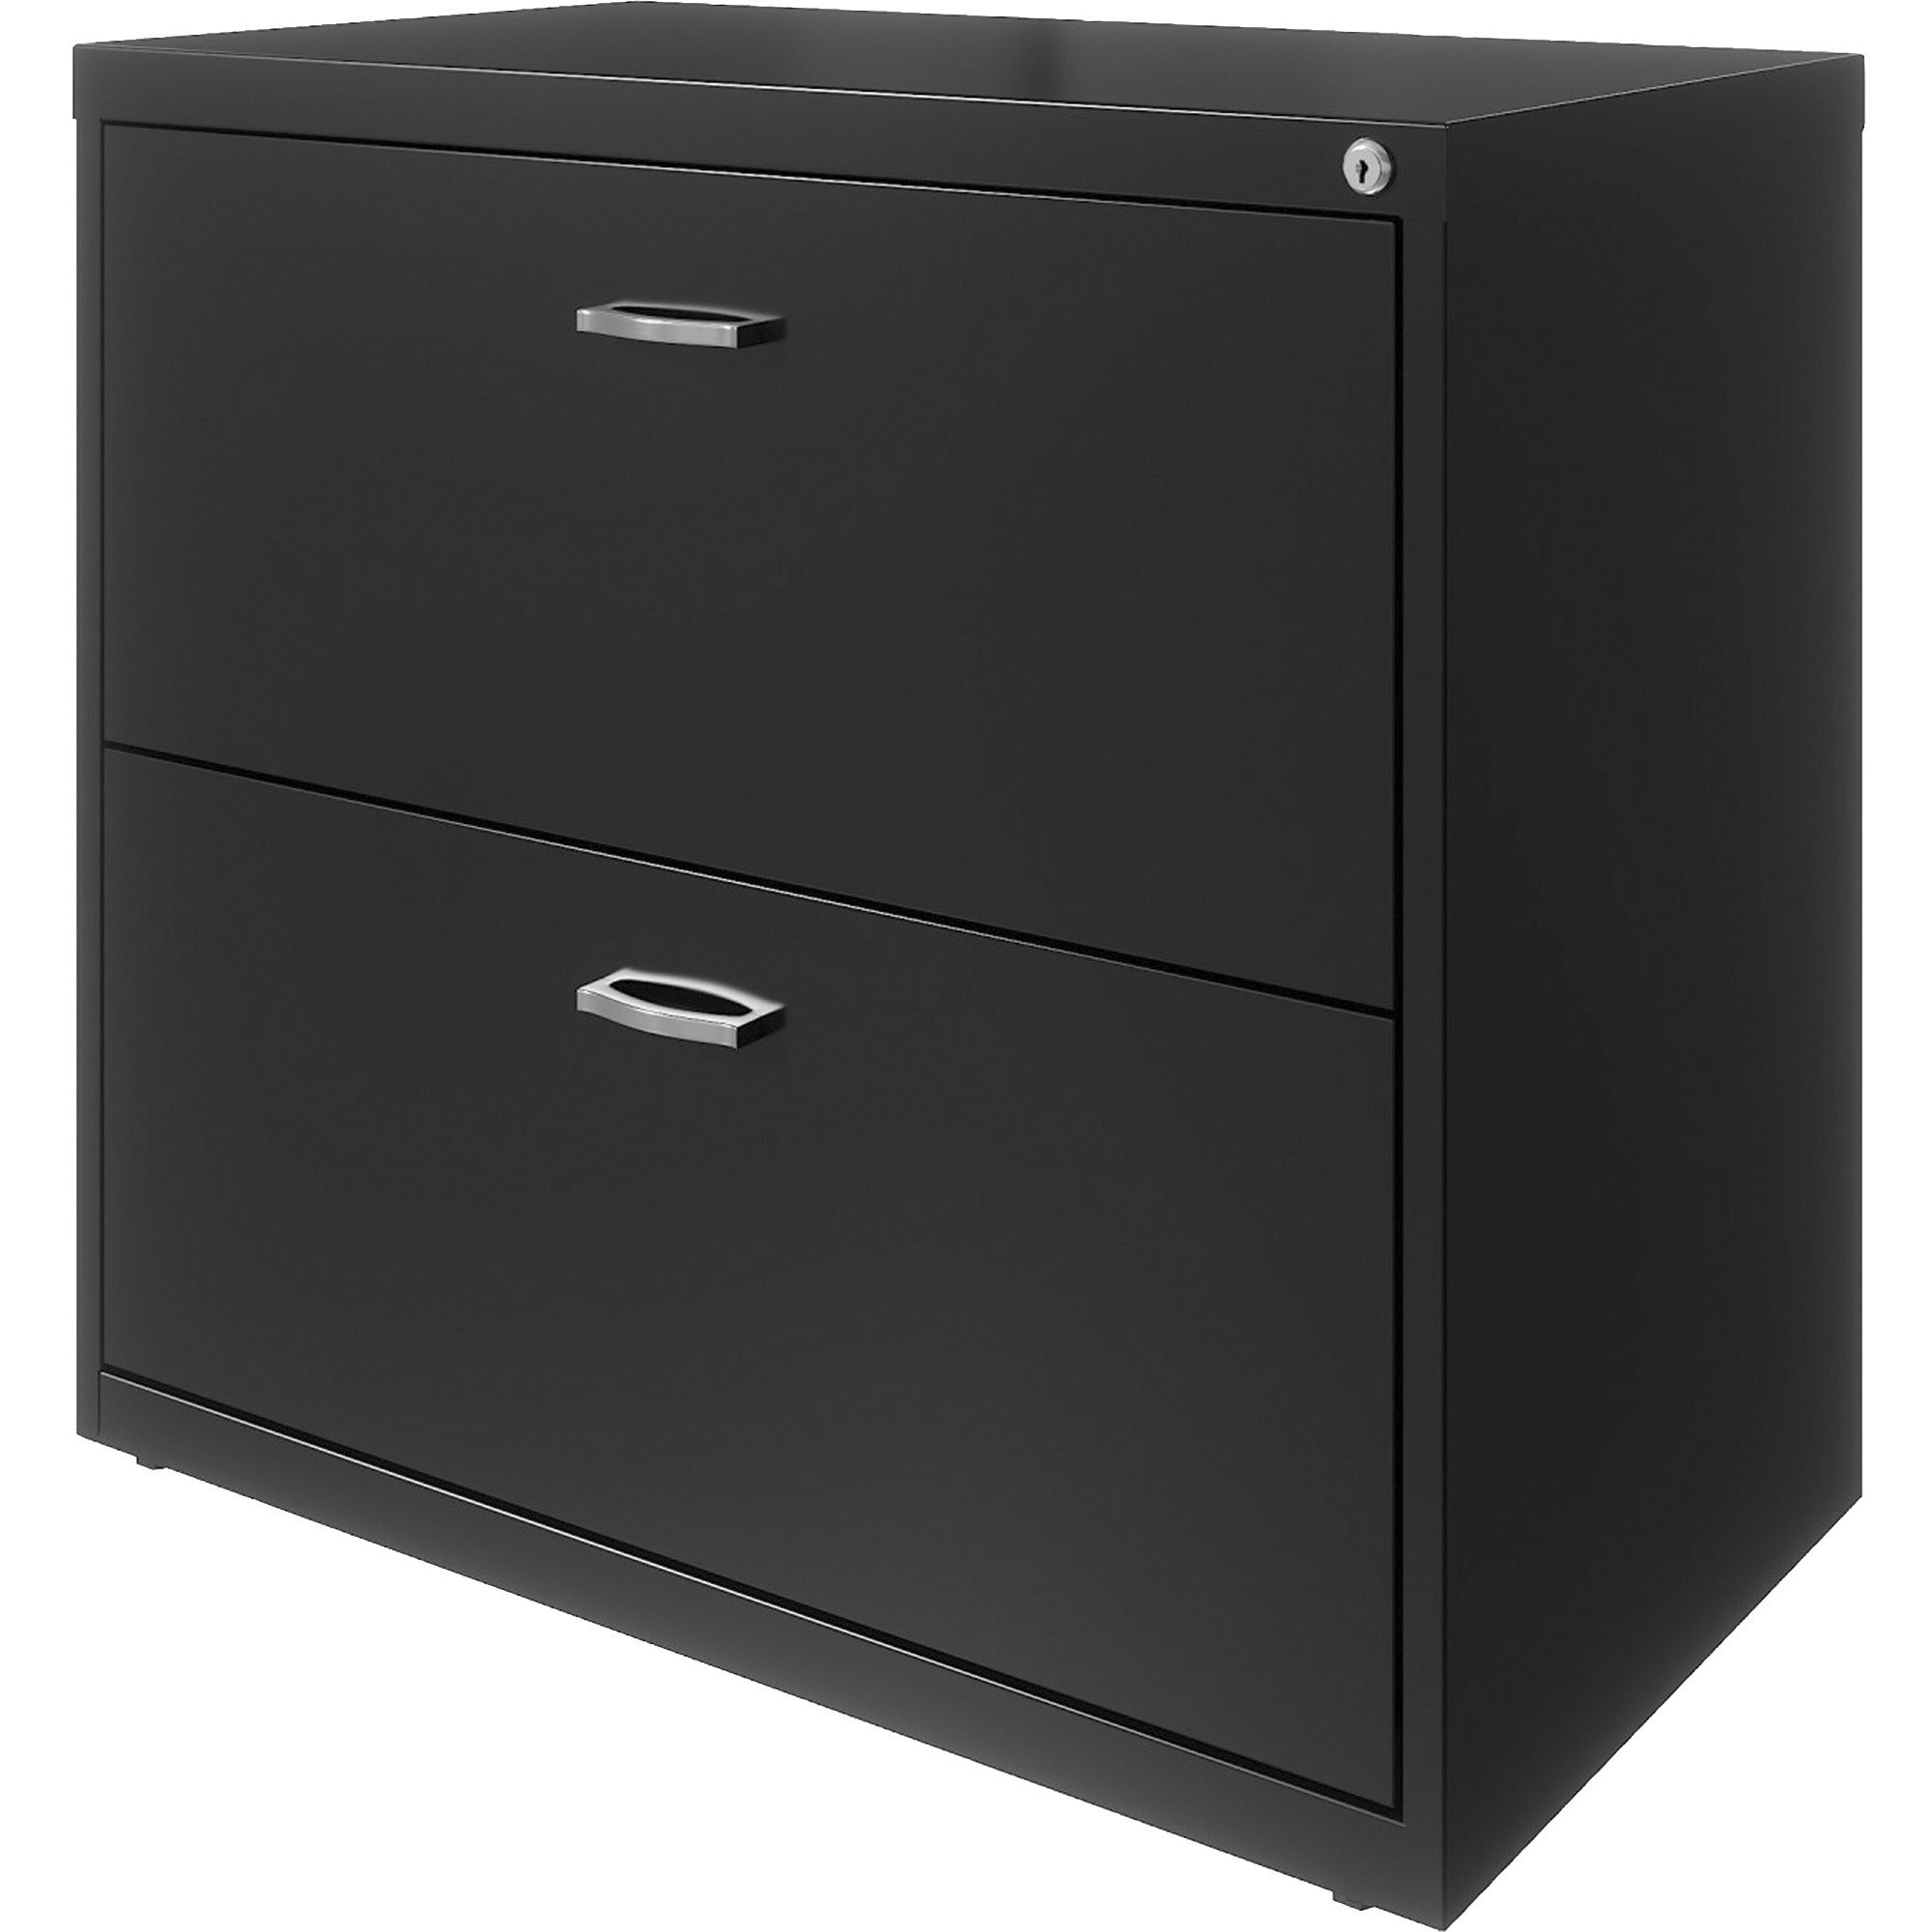 nusparc-2-drawer-lateral-file-30-x-176-x-277-2-x-drawers-for-file-letter-lateral-interlocking-anti-tip-ball-bearing-slide-ball-bearing-suspension-removable-lock-leveling-glide-adjustable-glide-durable-nonporous-surface-blac_nprlf218aabk - 3